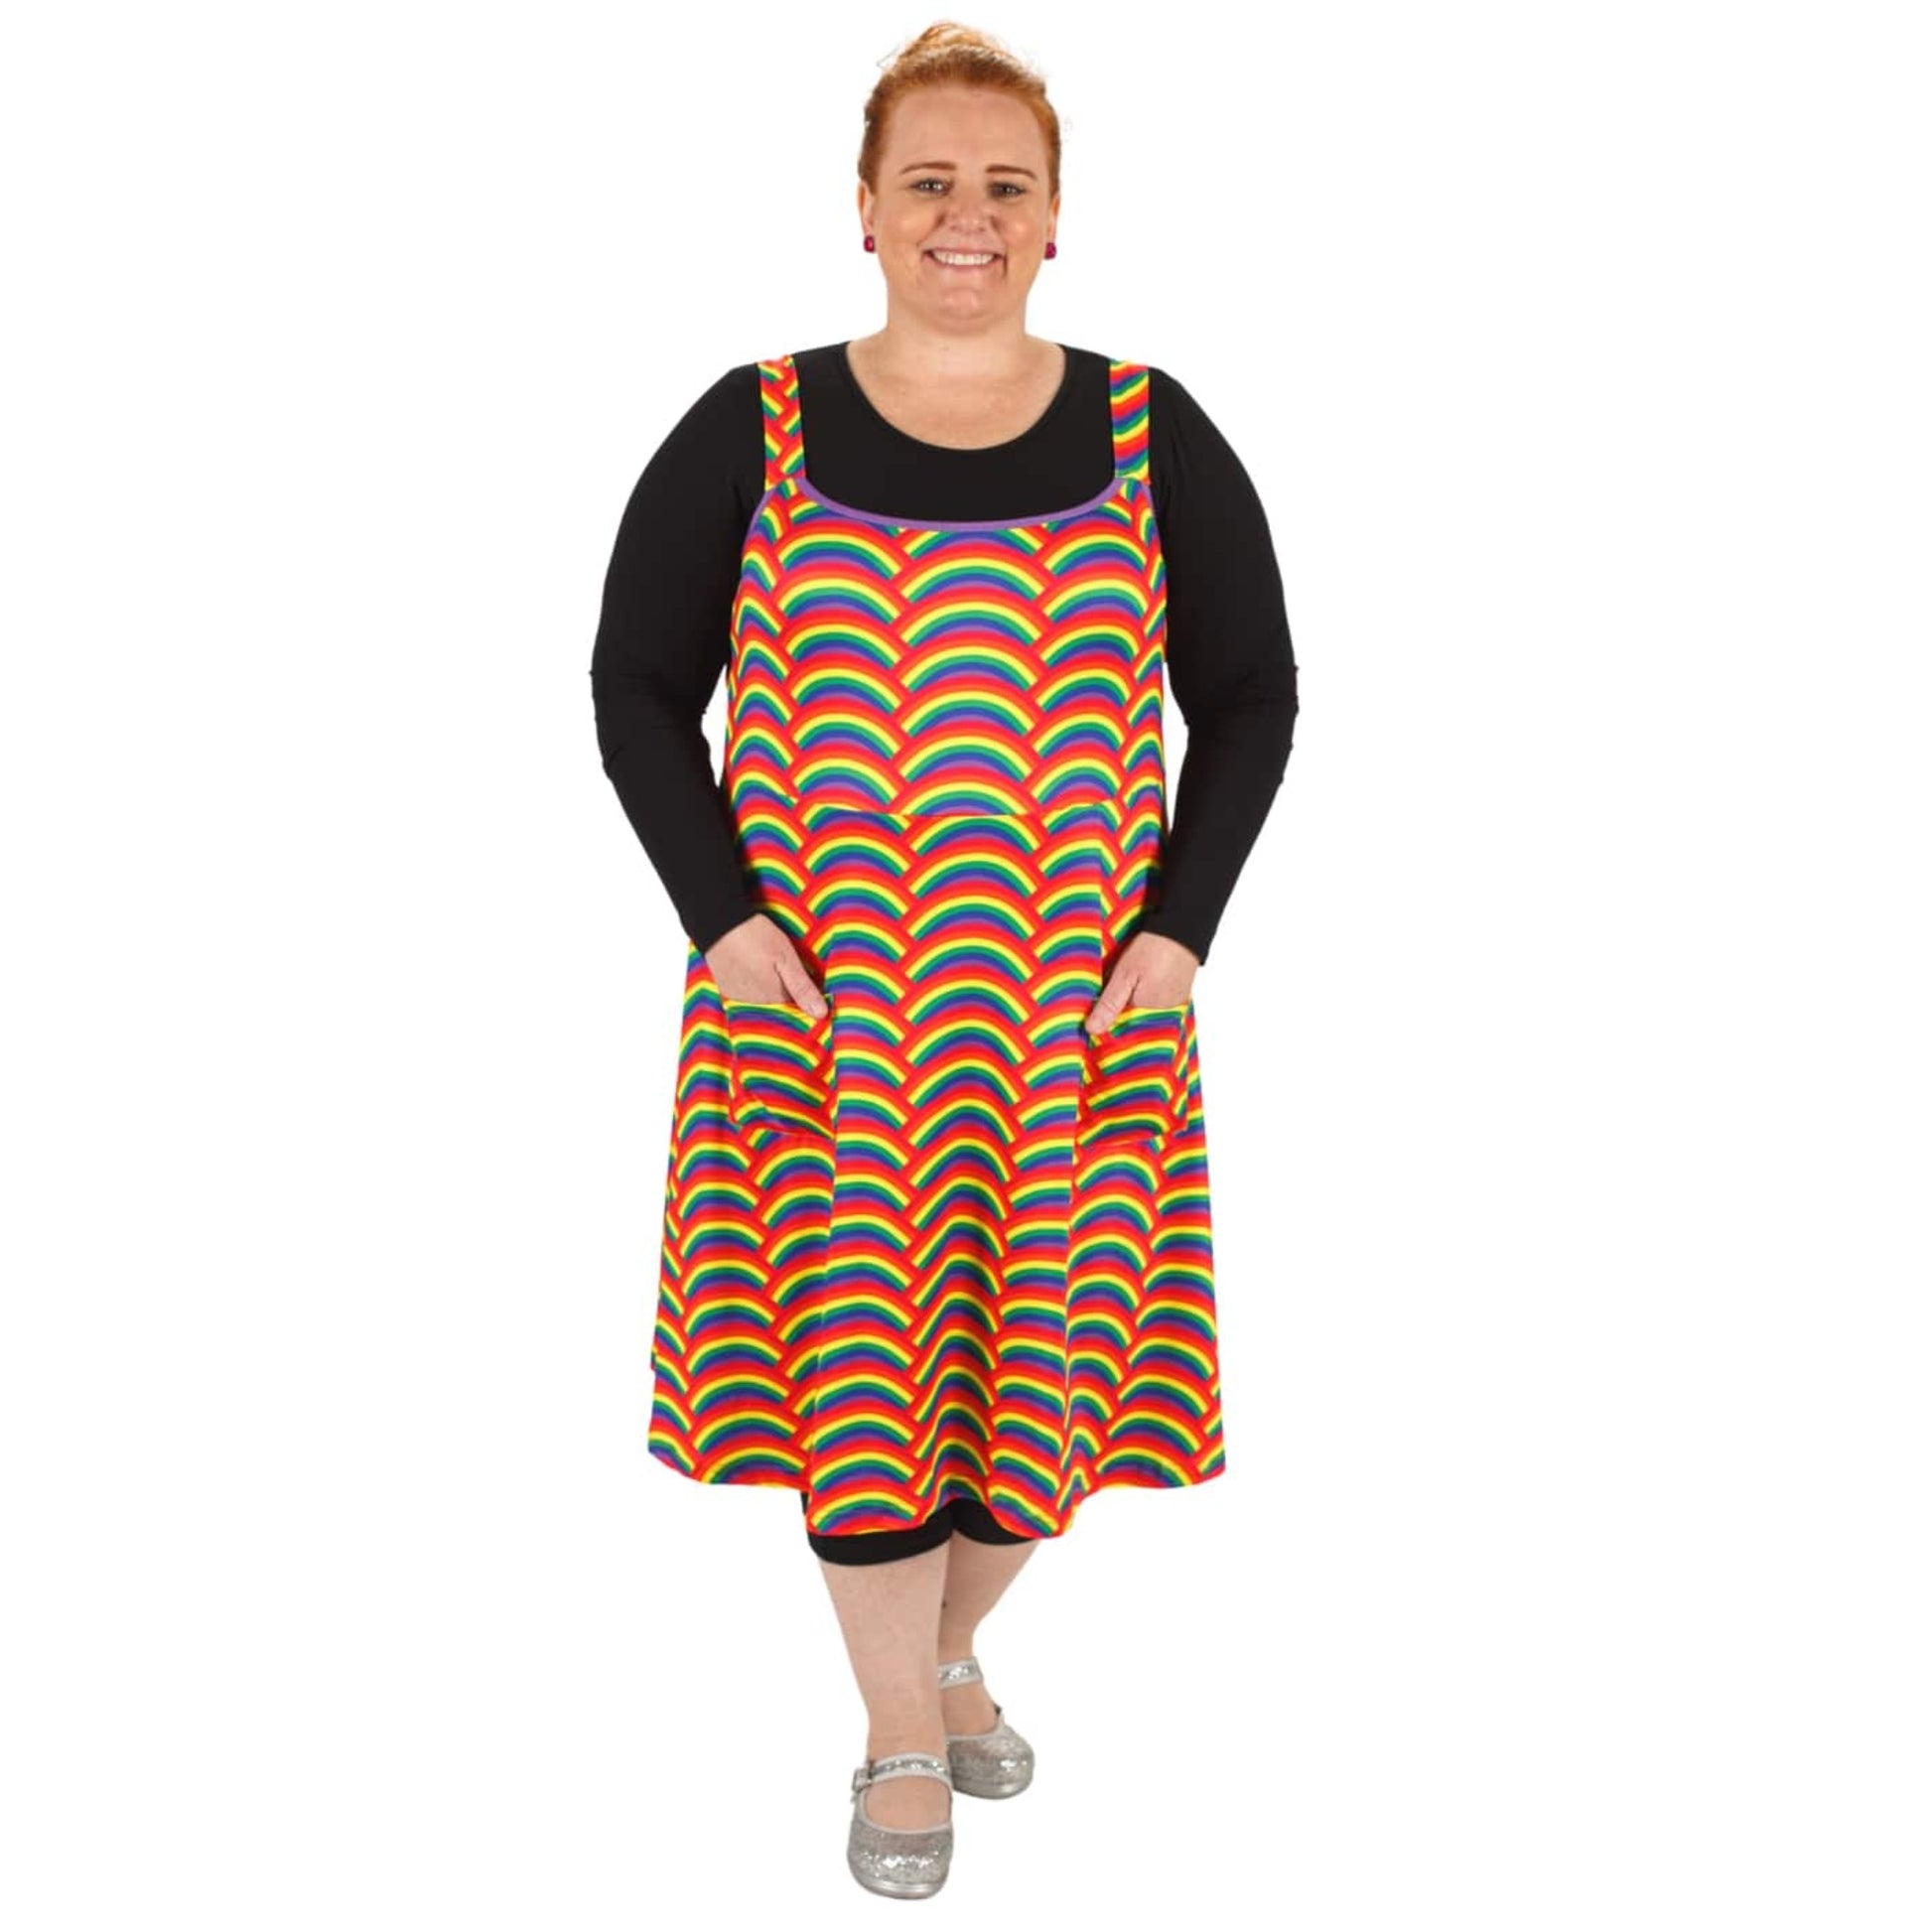 Rainbow Pinafore by RainbowsAndFairies.com.au (Rainbows - Pride - Psychedelic - Dress With Pockets - Pinny - Kitsch - Vintage Inspired) - SKU: CL_PFORE_RAINB_ORG - Pic-04